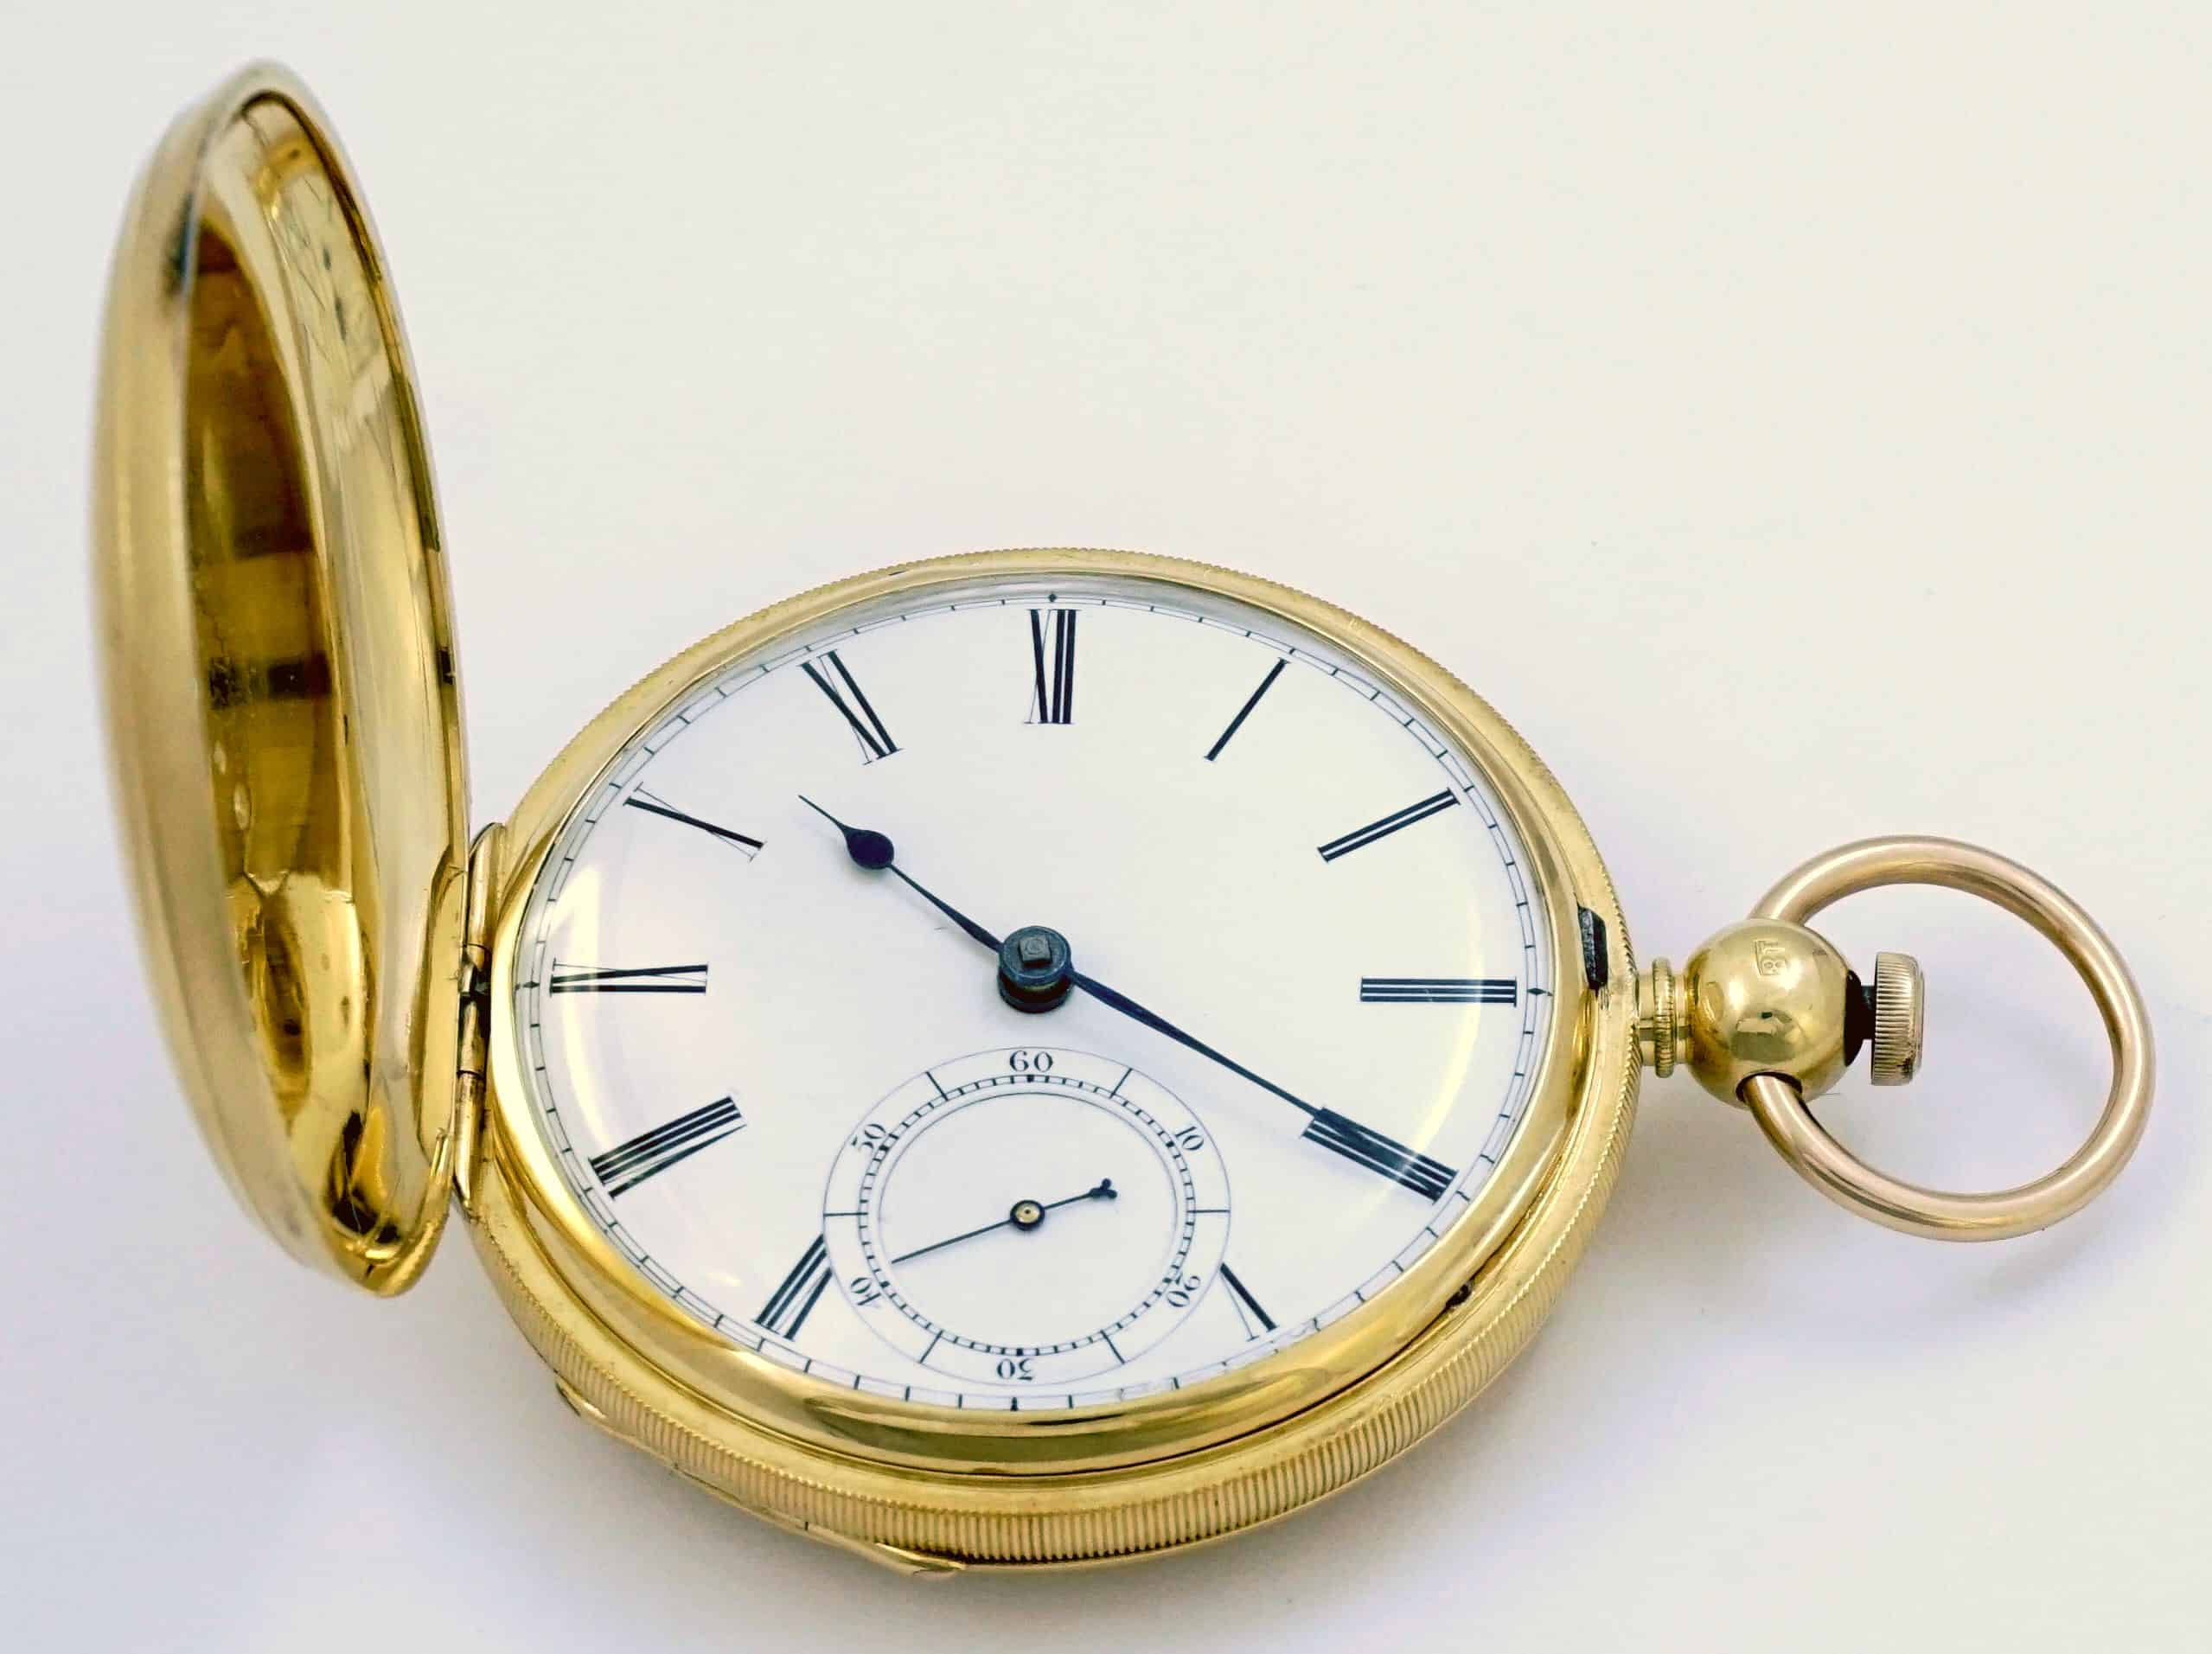 Rusty Pocket Watch Of 'Titanic' Victim Sold At Auction For $57,500